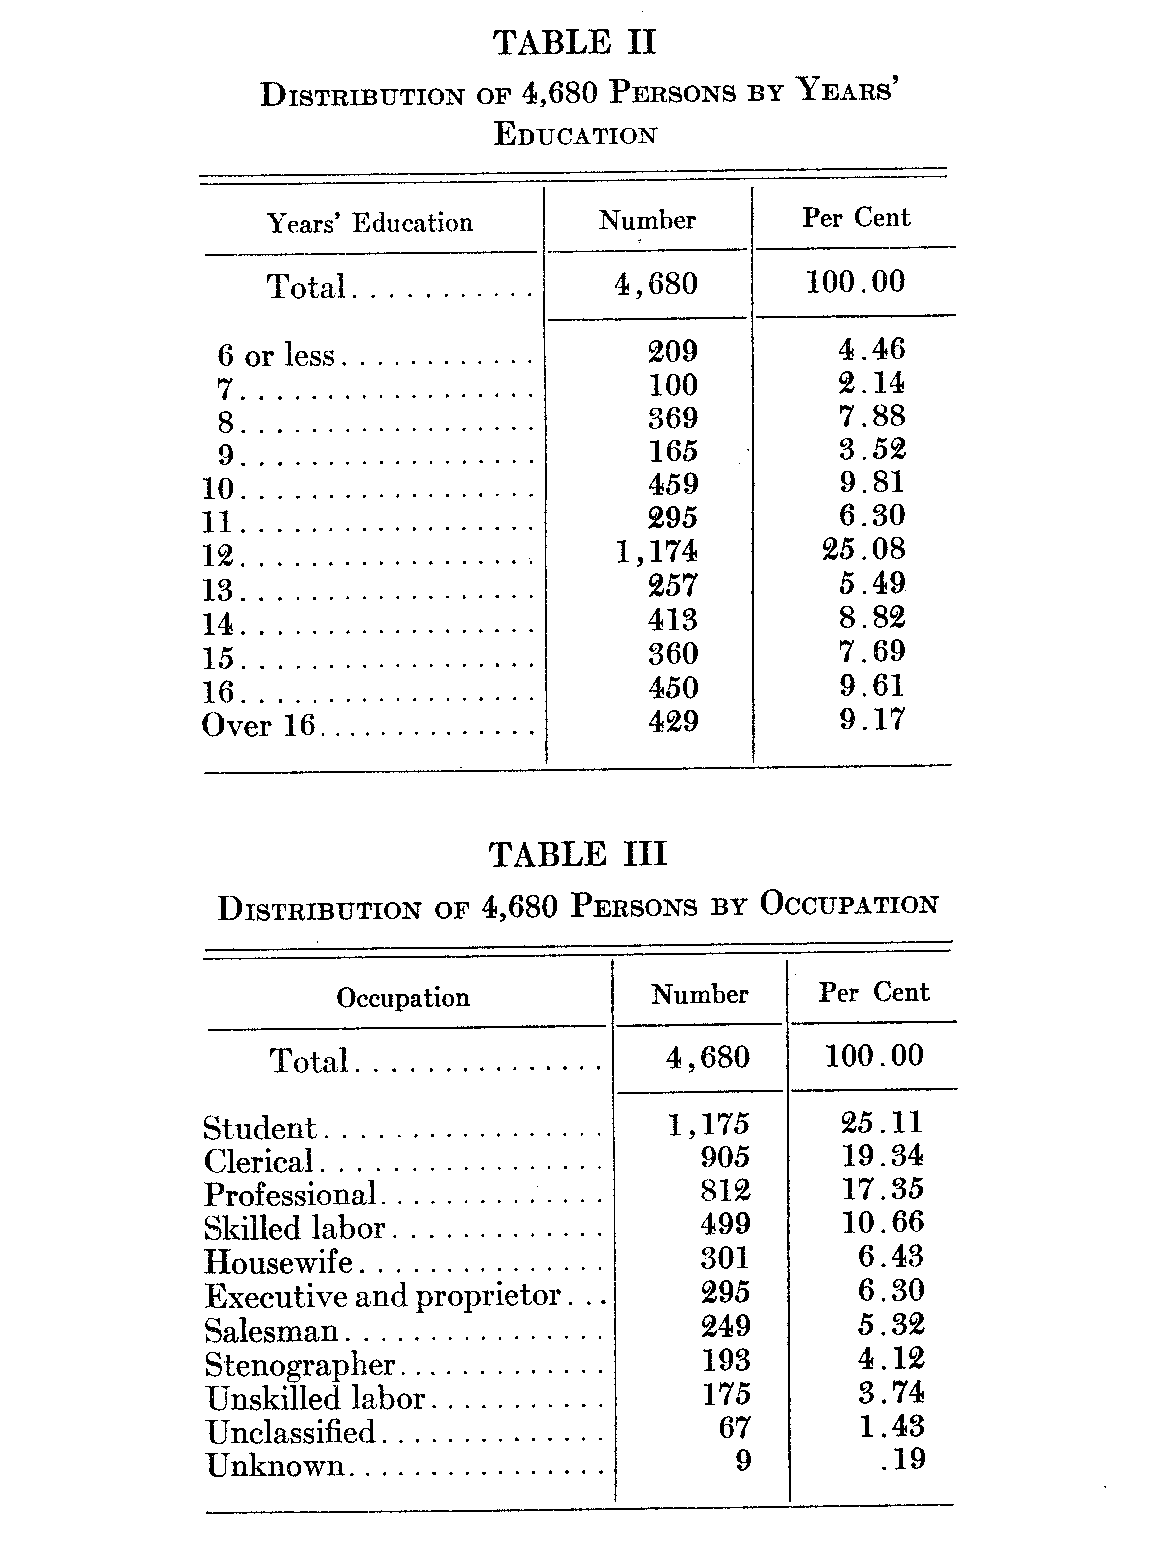 Table 2 (Distribution of 4680 persons by years of education) and Table 3 by occupation